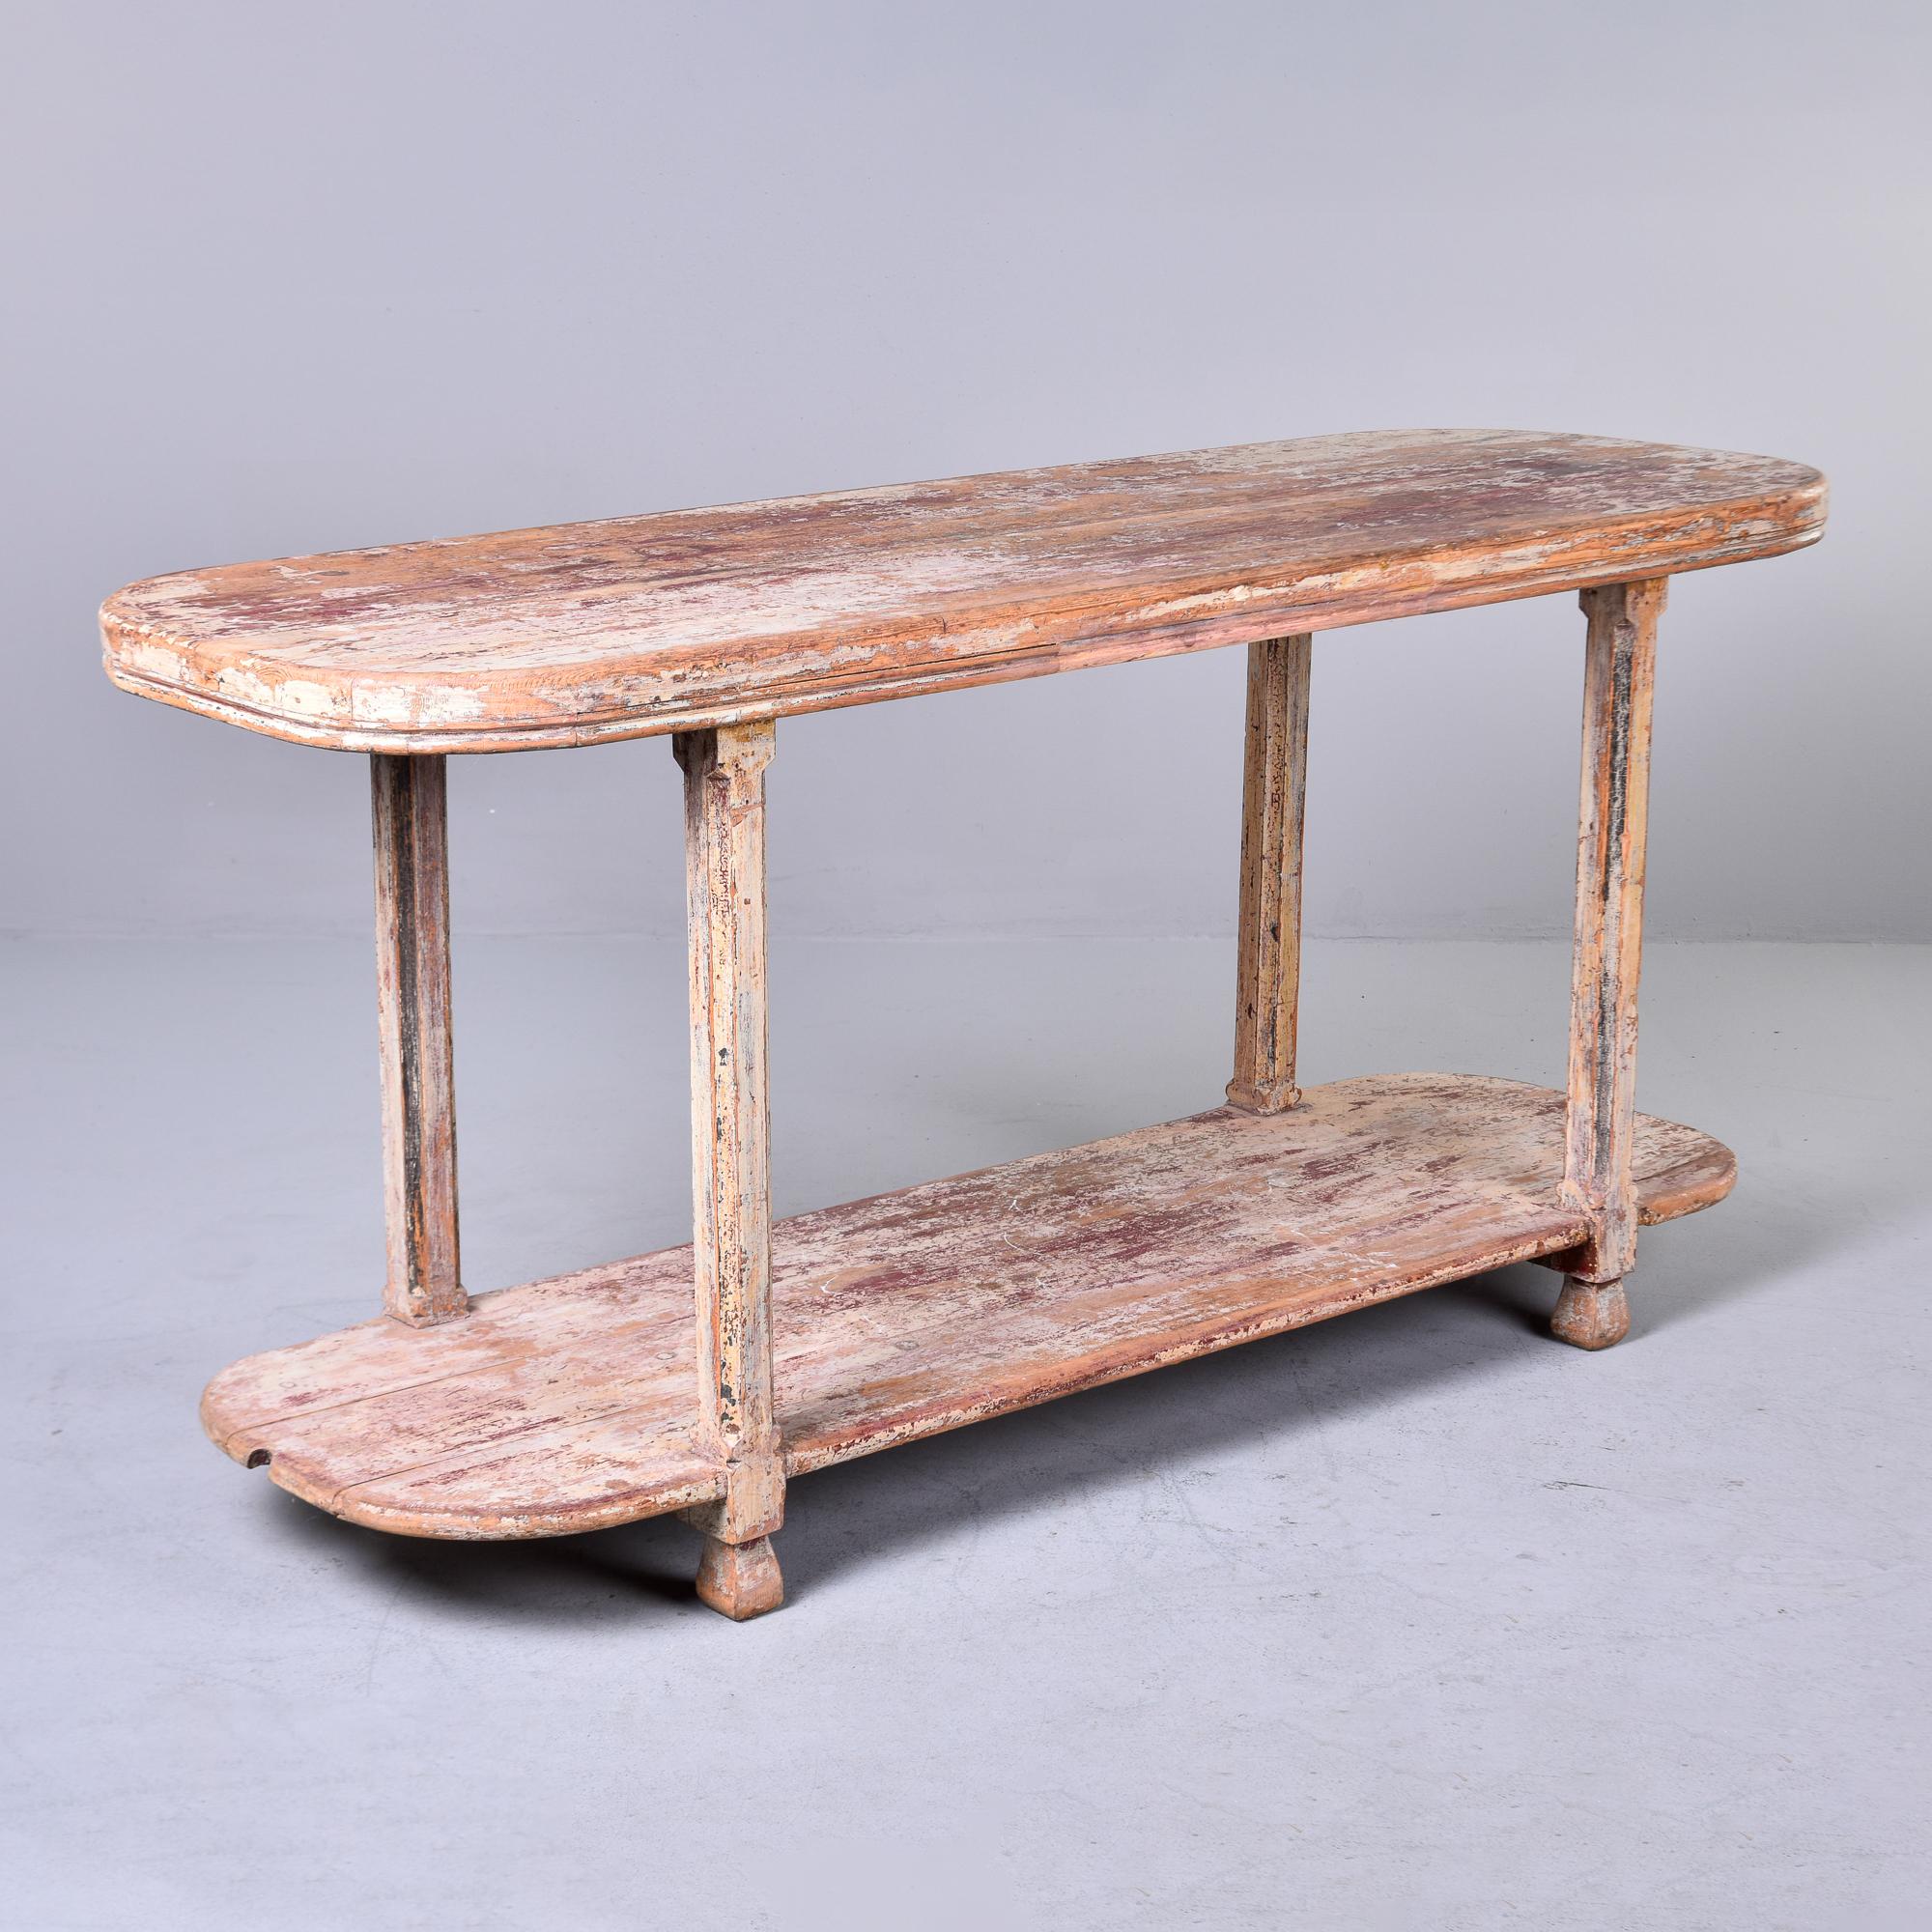 Found in France, this circa 1900 two tier table has an elongated oval top and lower tier with four legs and remnants of the original painted finish. Original paint of deep red and creamy antique white is mostly worn away and has been sanded smooth